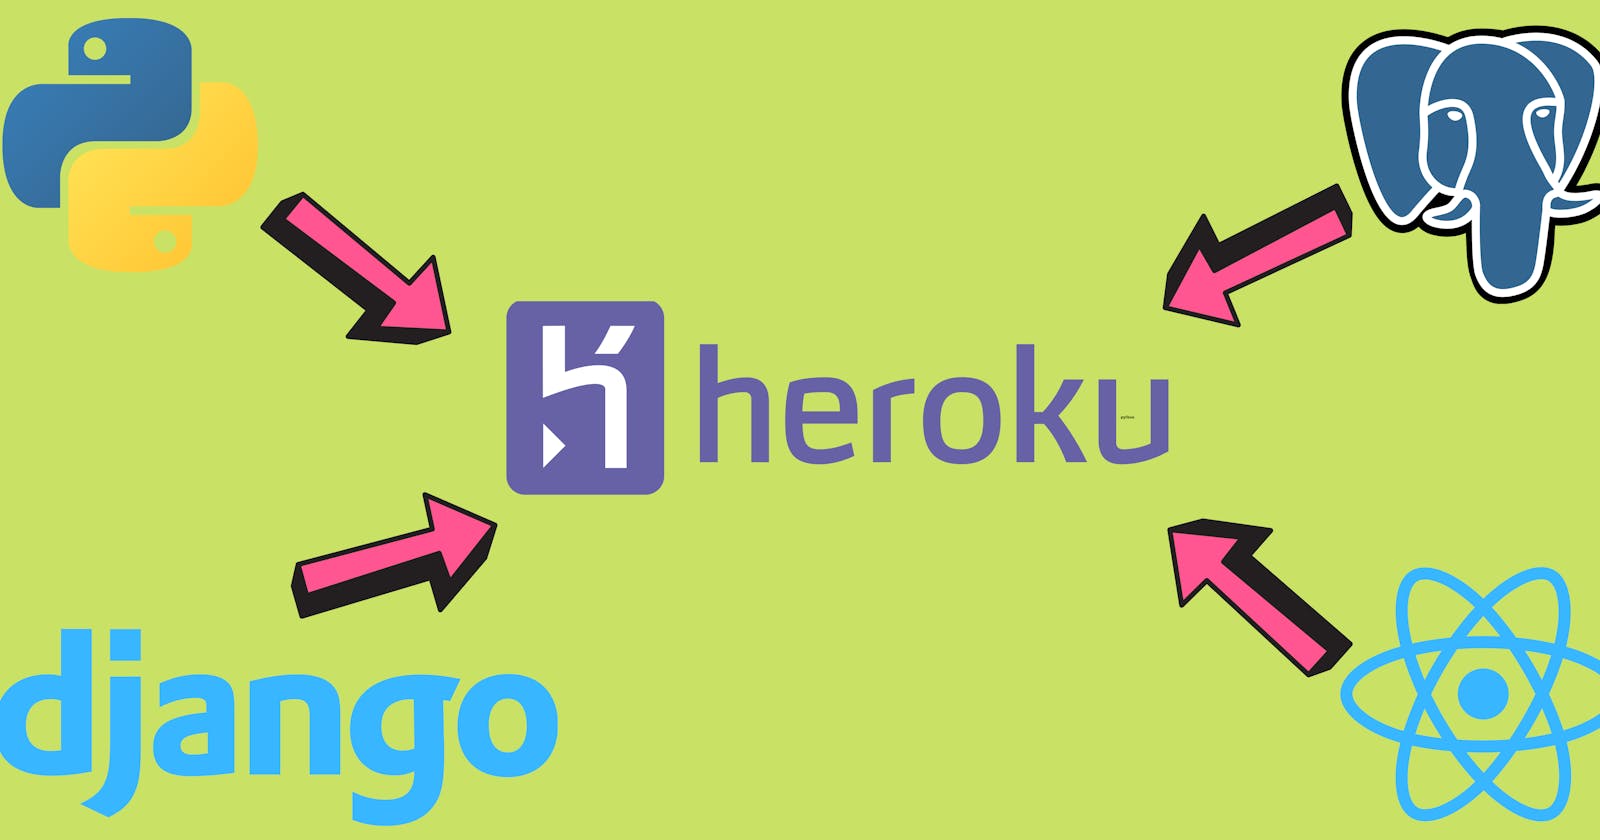 How to deploy the Front-end(React) and Backend(Django) with Postgres at Heroku